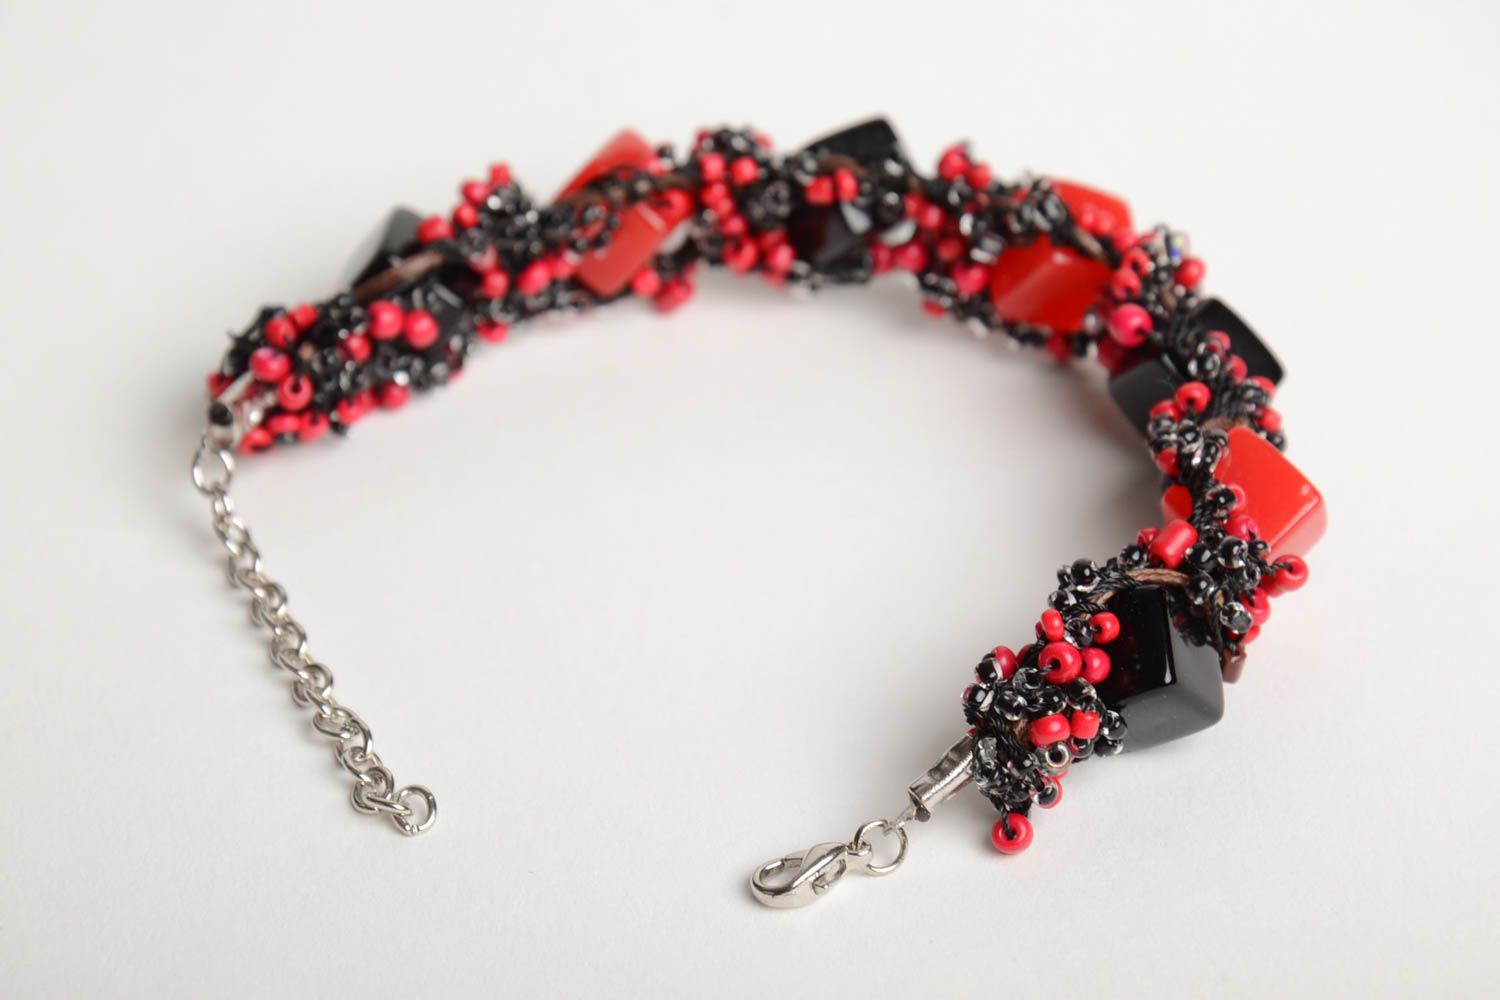 Handmade red and black bead woven wrist bracelet with chain and square beads photo 4